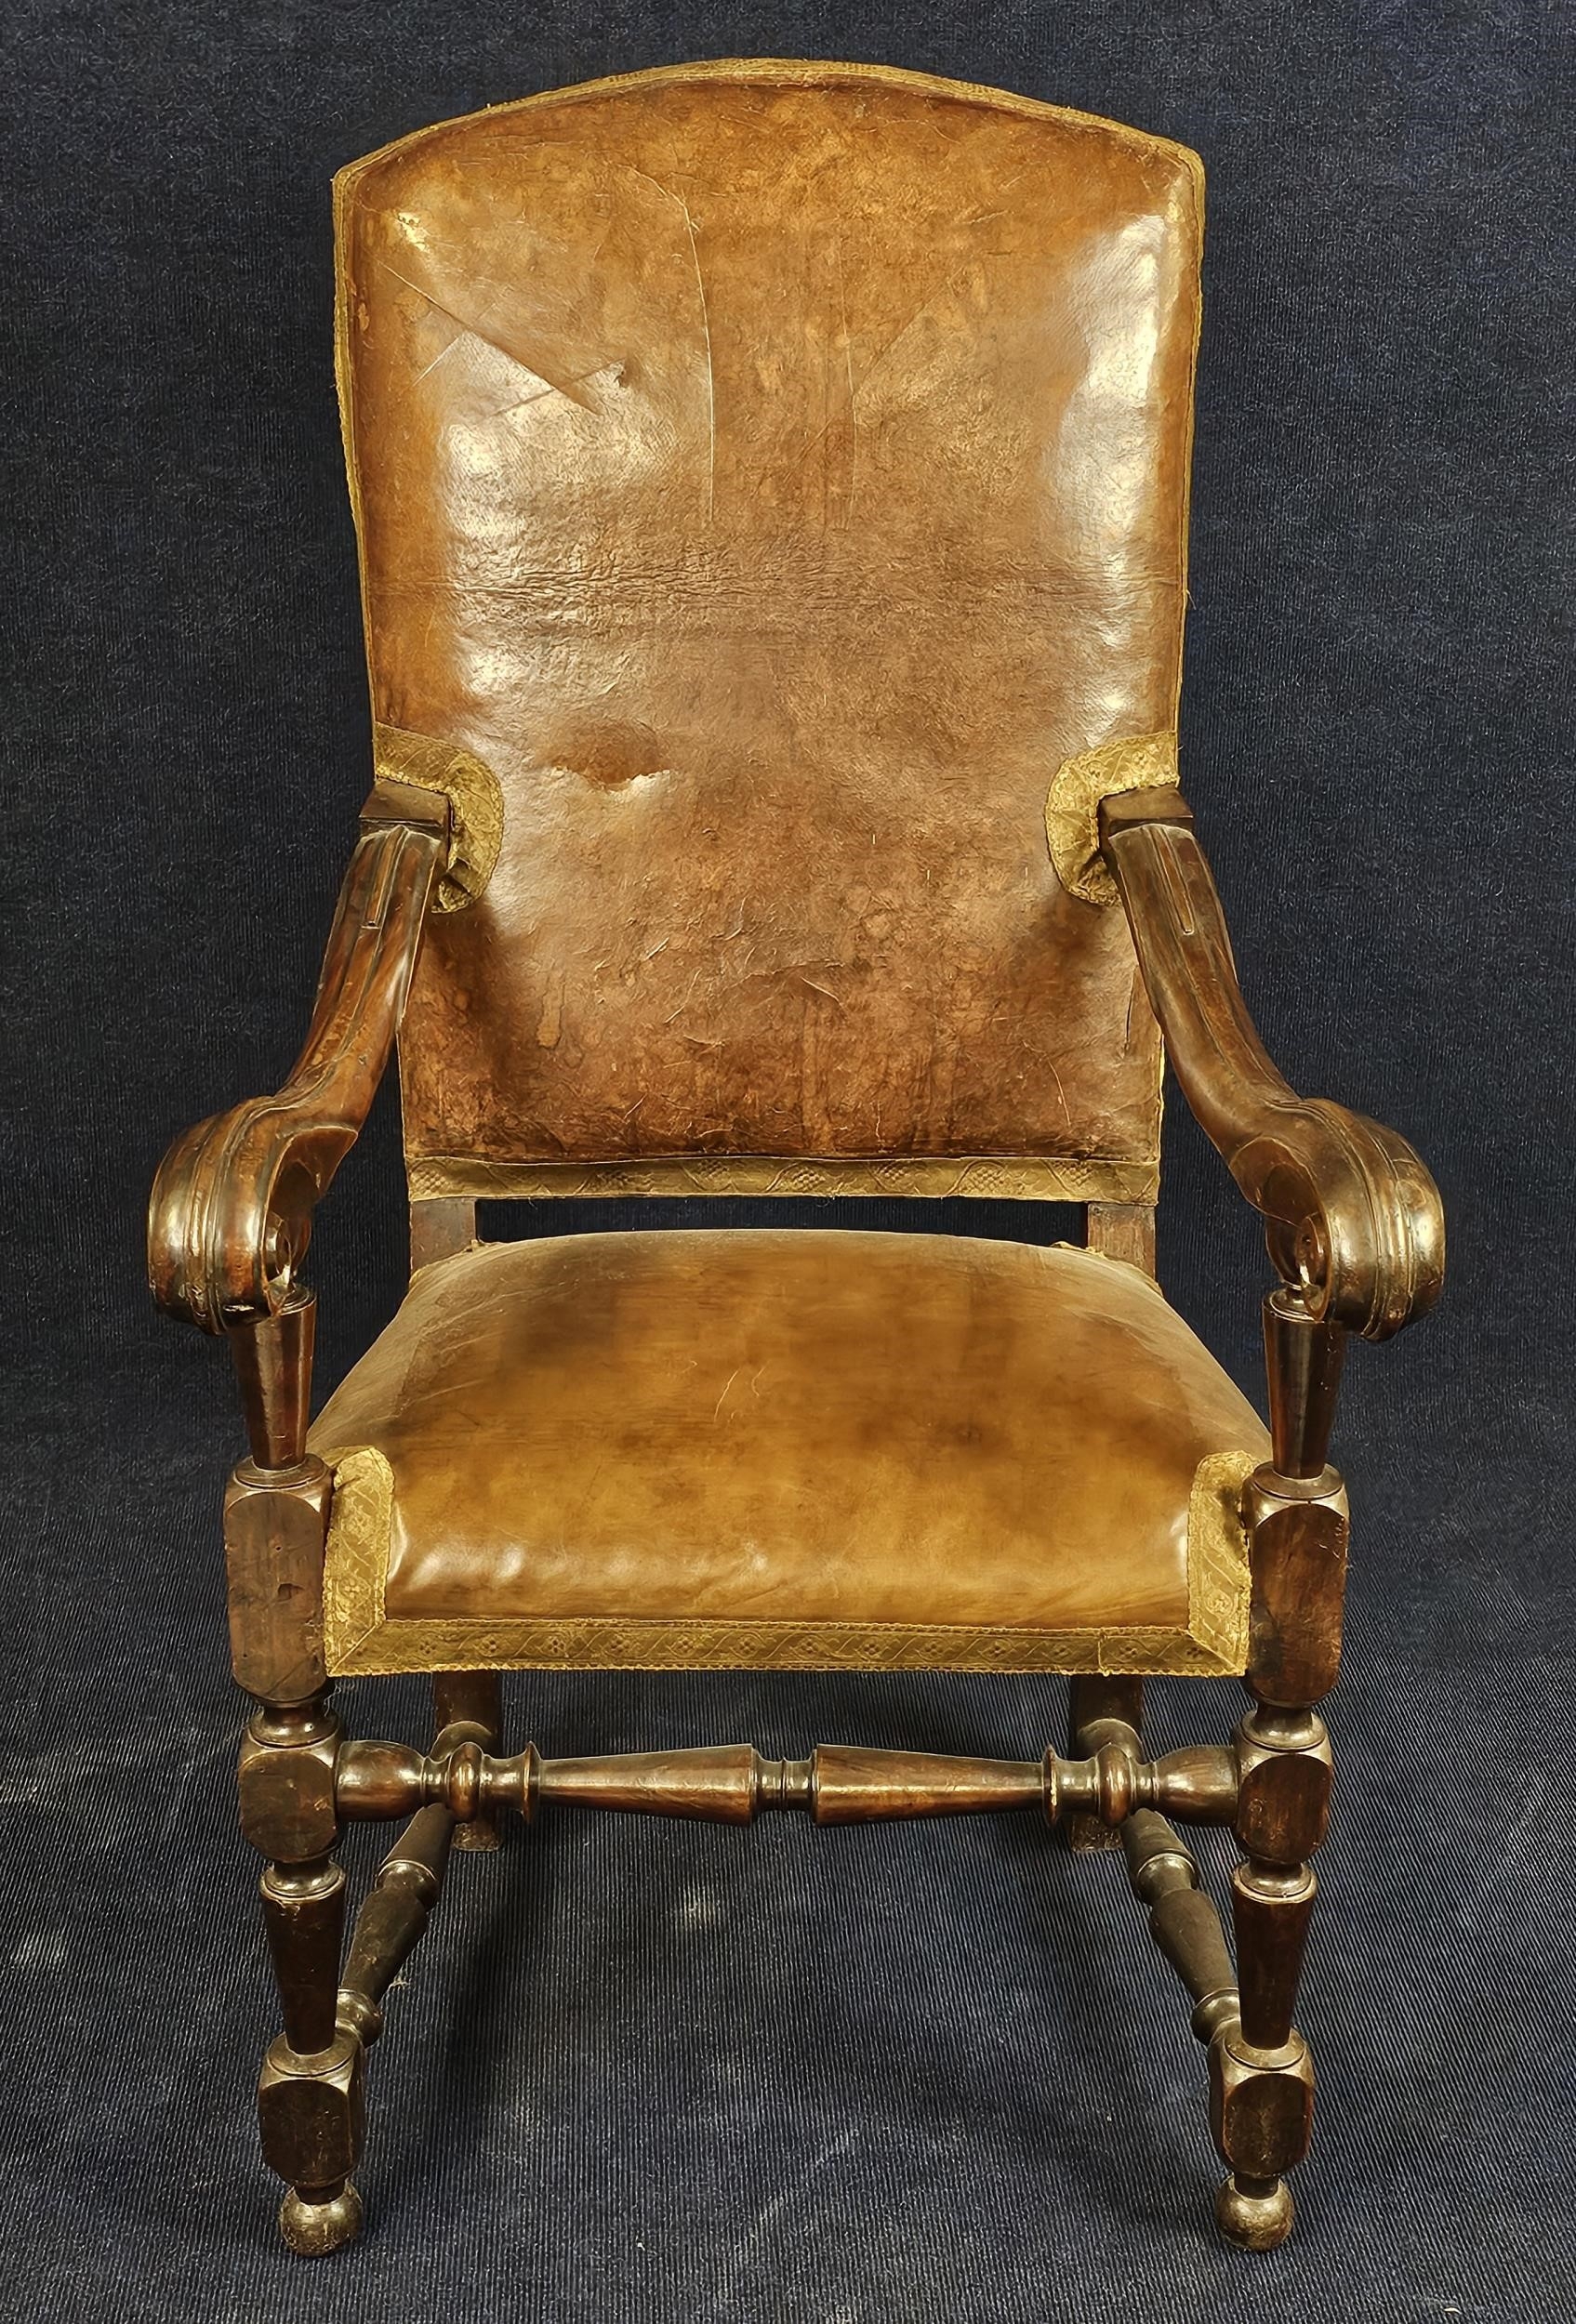 A 19th century Continental carved armchair in leather upholstery.